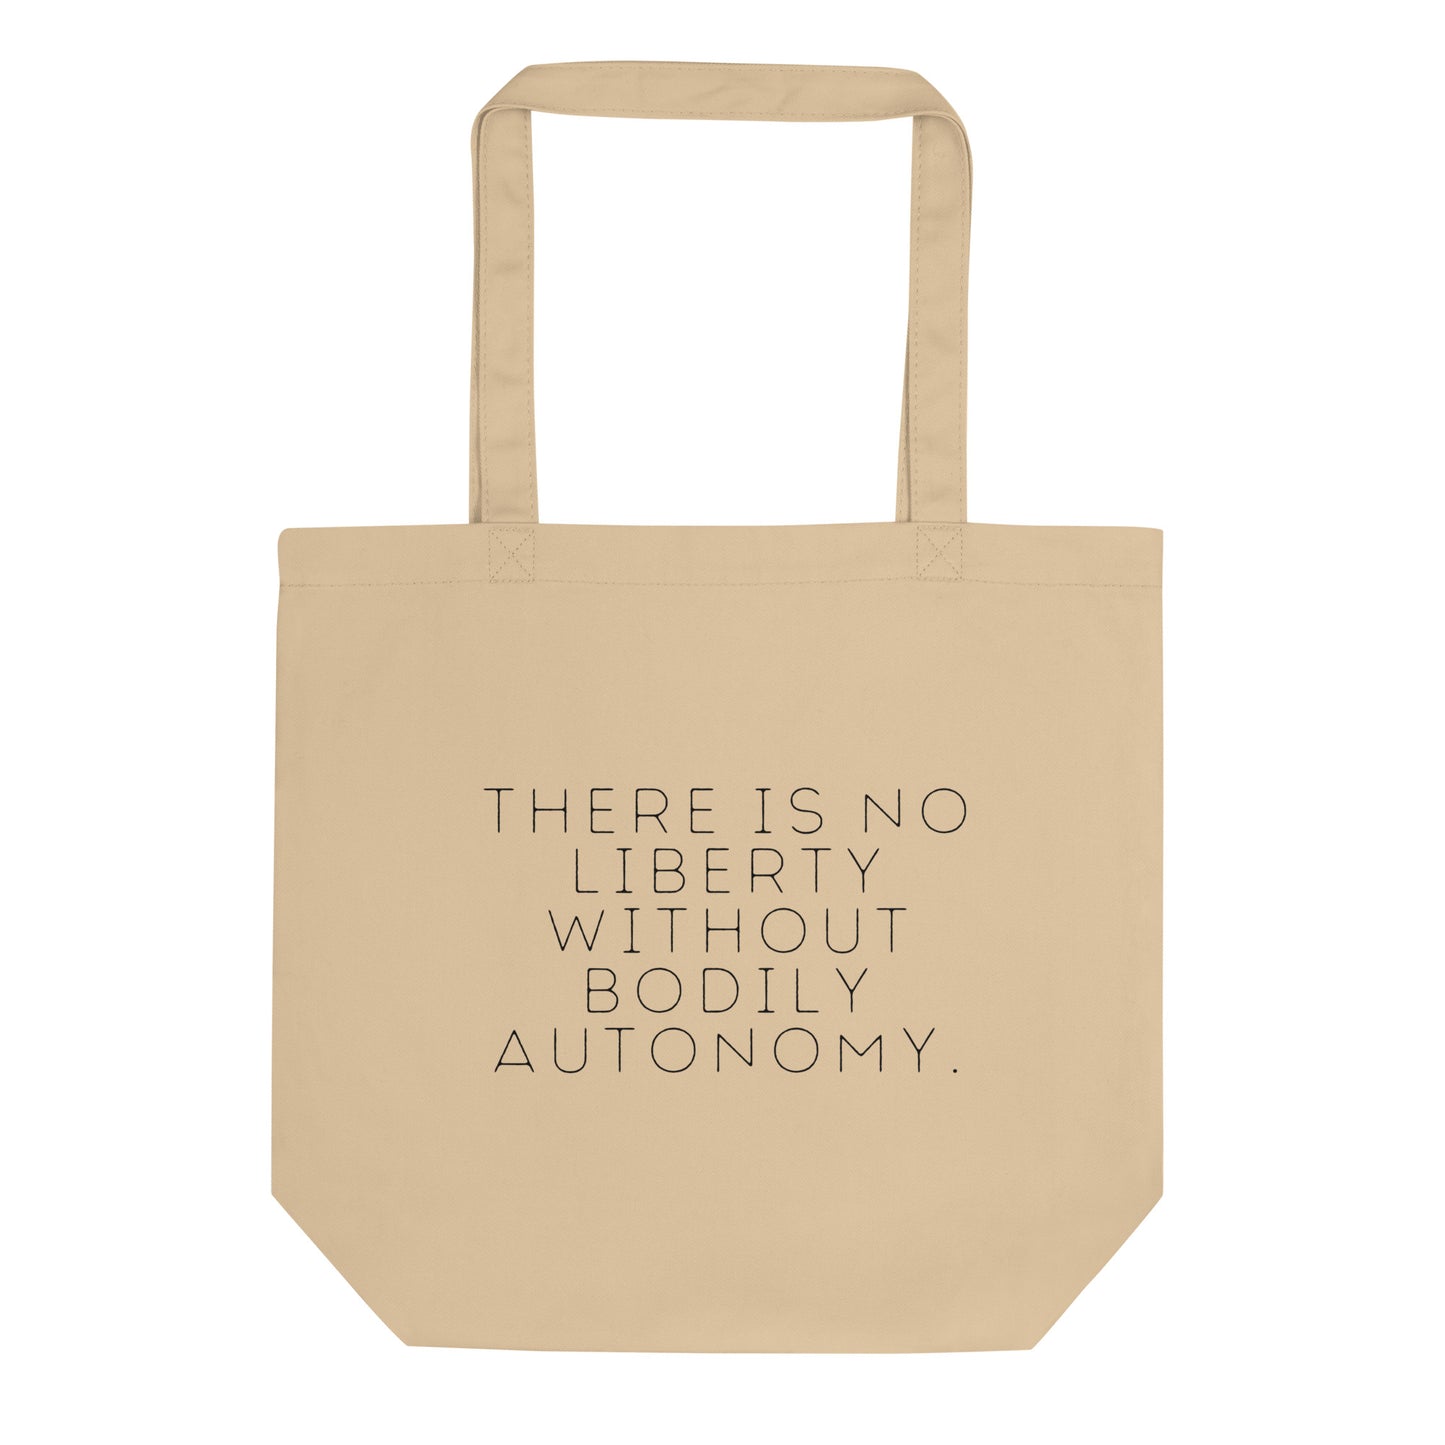 There is no liberty without bodily autonomy Tote